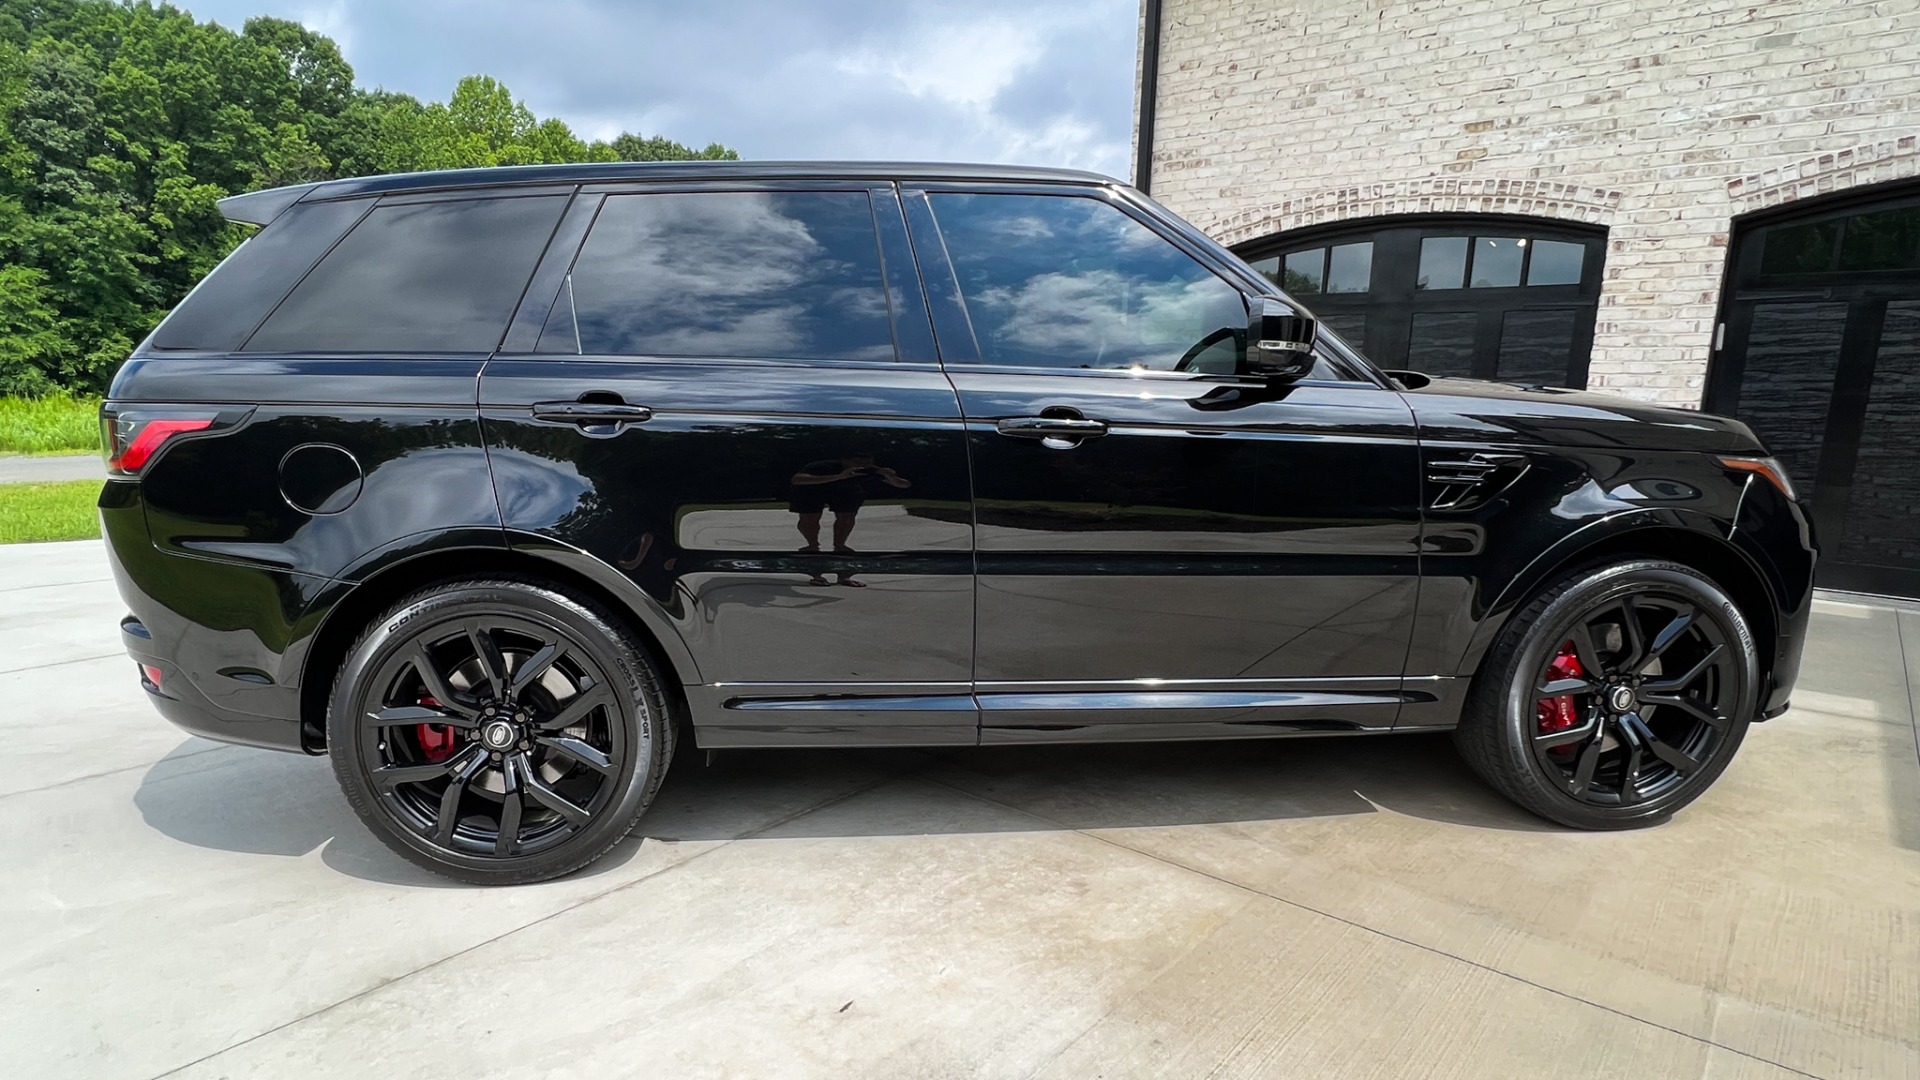 Used 2018 Land Rover Range Rover Sport SVR / 22IN WHEELS / DRIVE PRO / TOW PACK / MERIDIAN SOUN for sale $105,995 at Formula Imports in Charlotte NC 28227 2